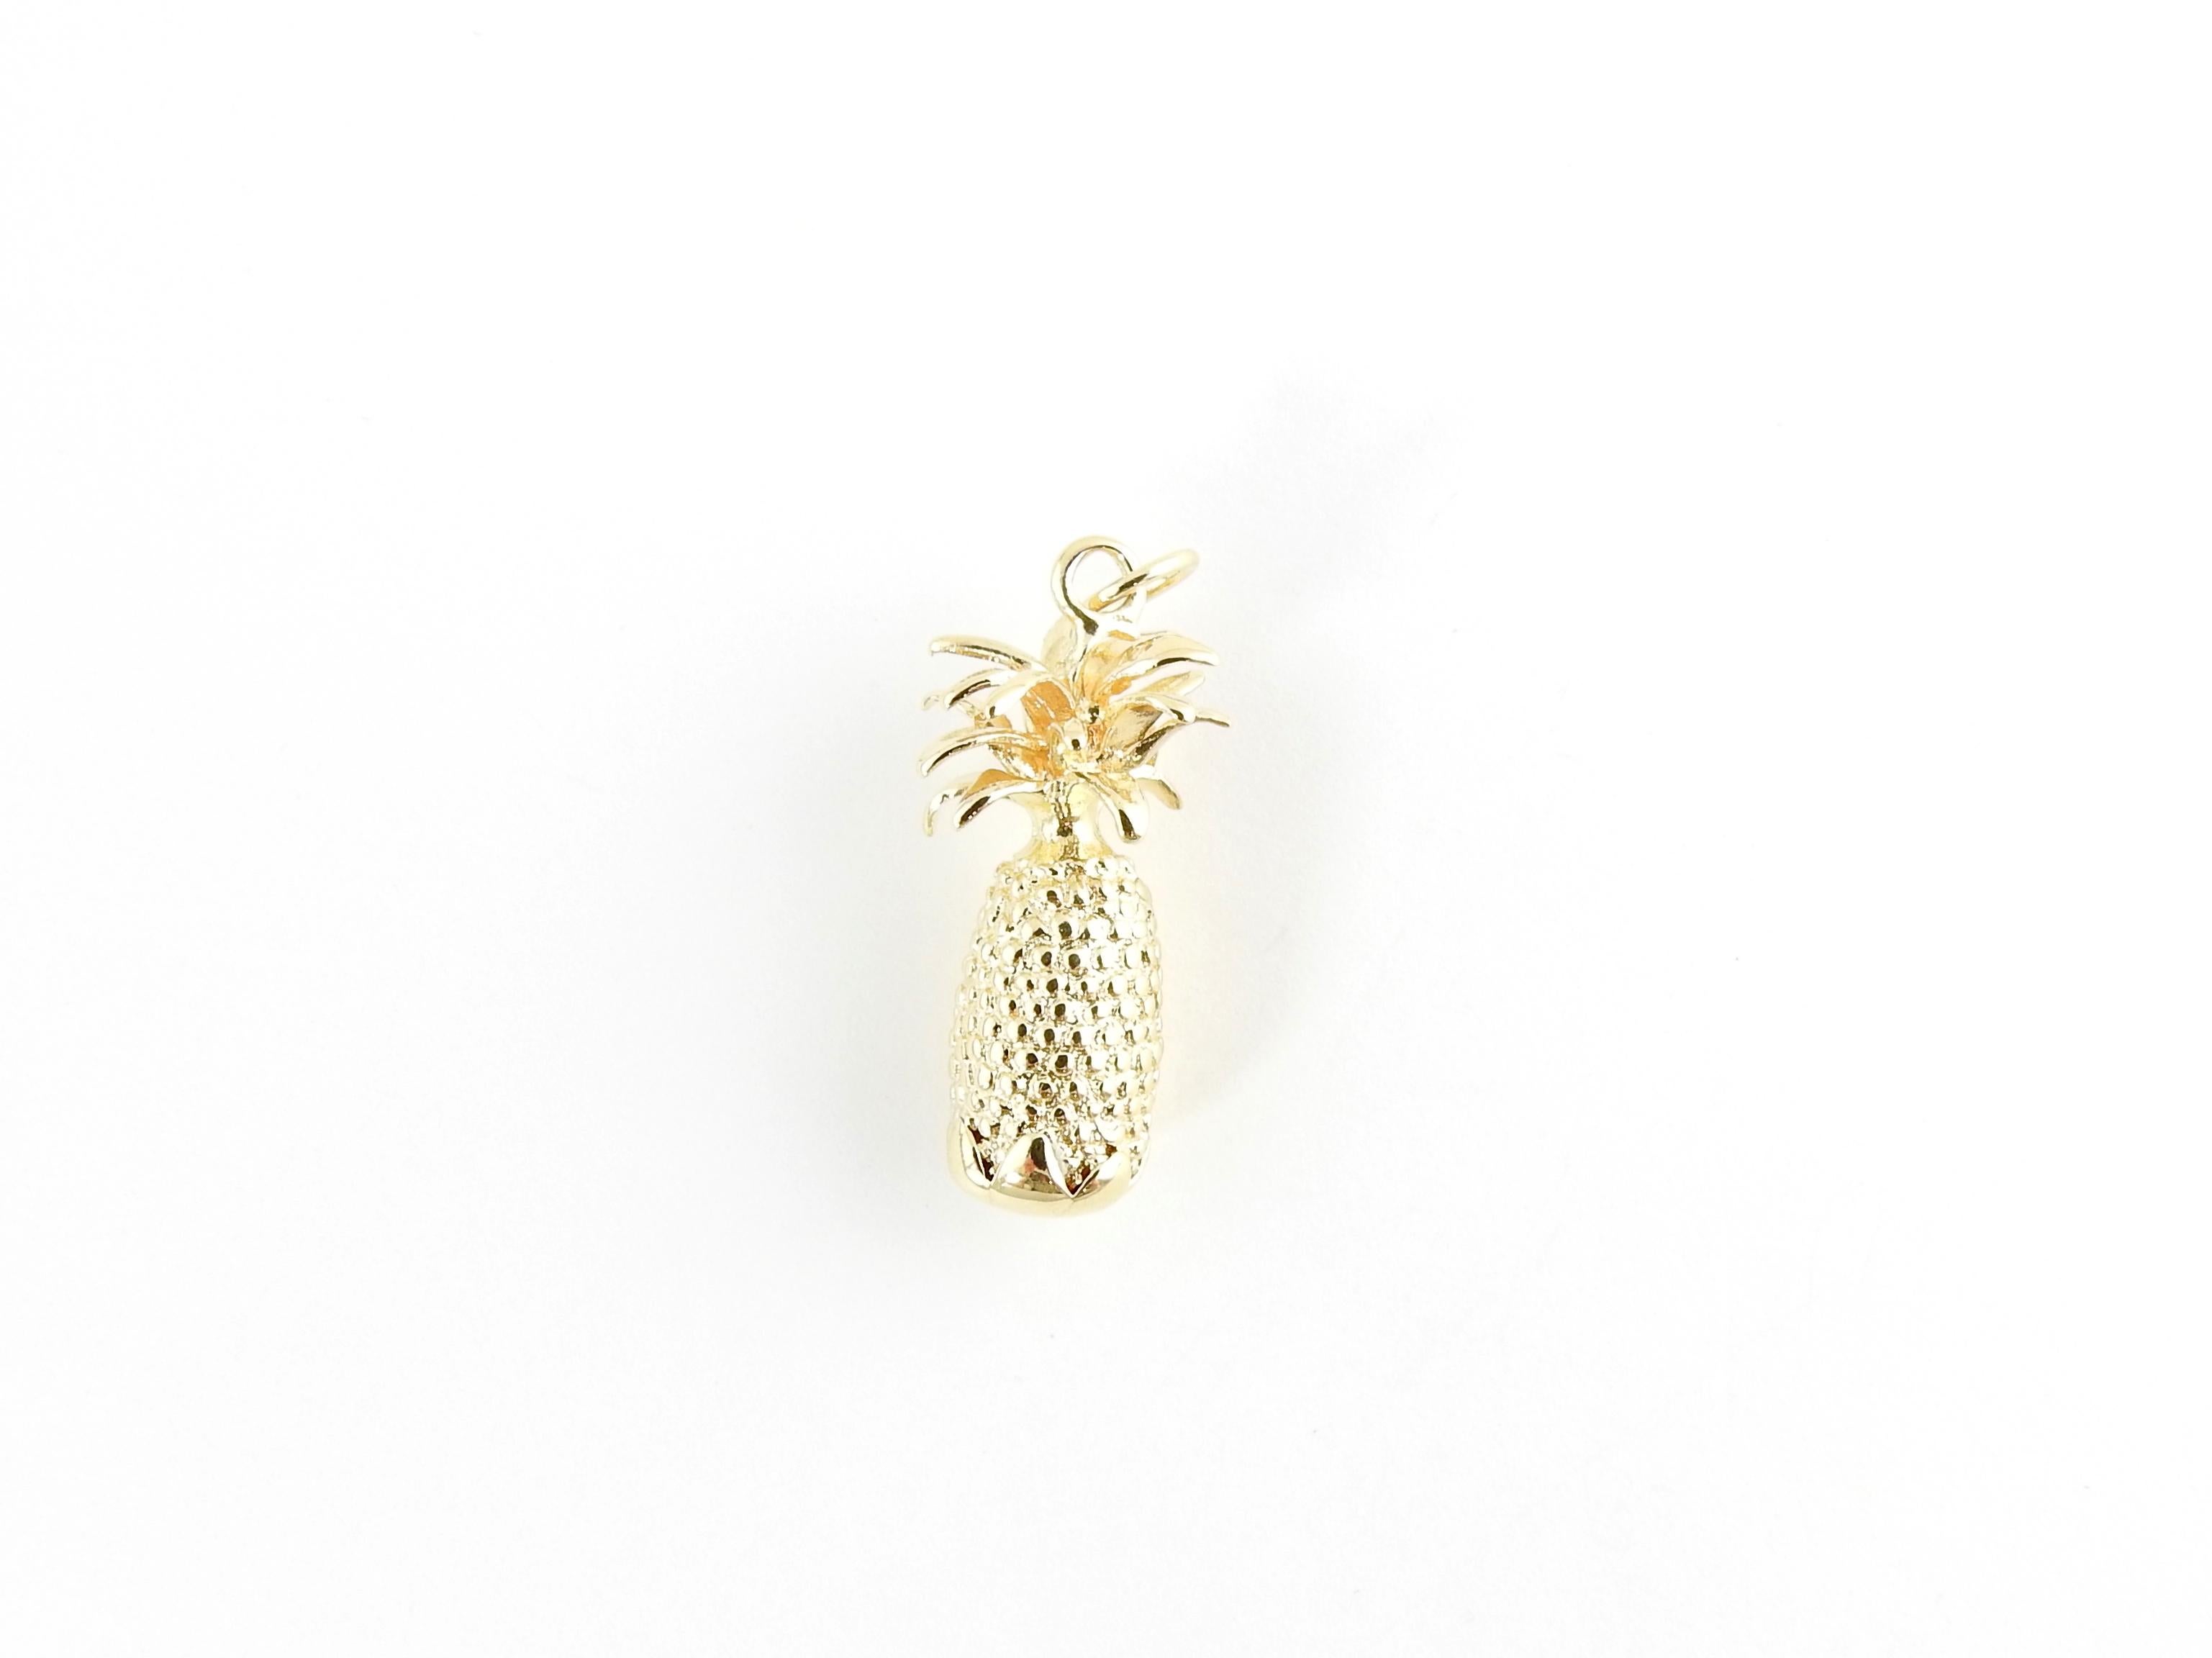 Vintage 14 Karat Yellow Gold Pineapple Charm

The pineapple signifies good cheer, hospitality and a sense of welcome!

This lovely 3D charm features a miniature pineapple meticulously detailed in 14K yellow gold.

Size: 27 mm x 11 mm (actual